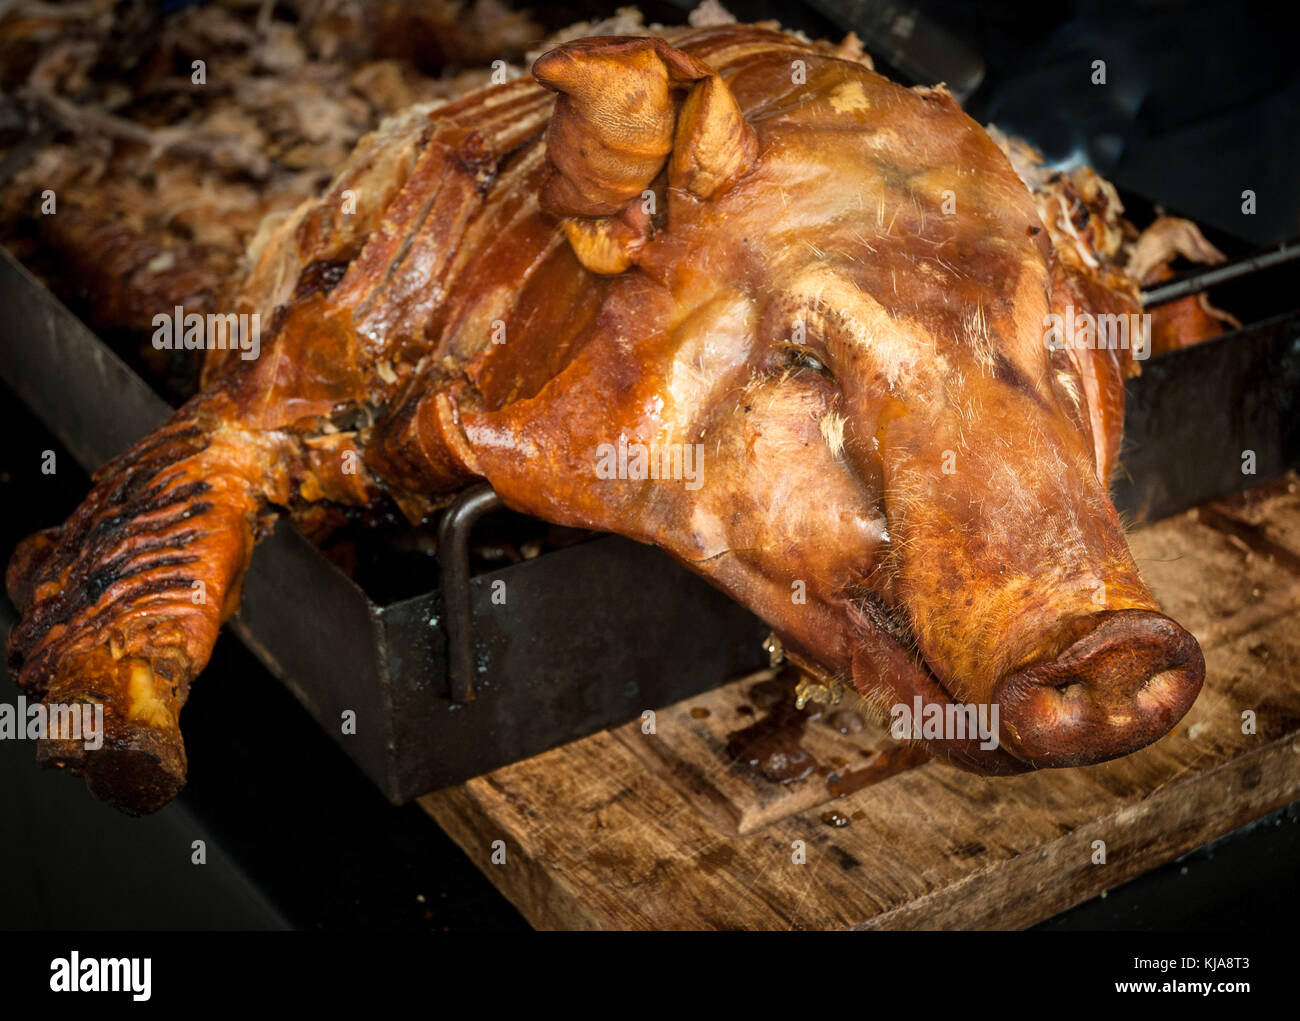 Spit roasted pig at a banquet. Stock Photo